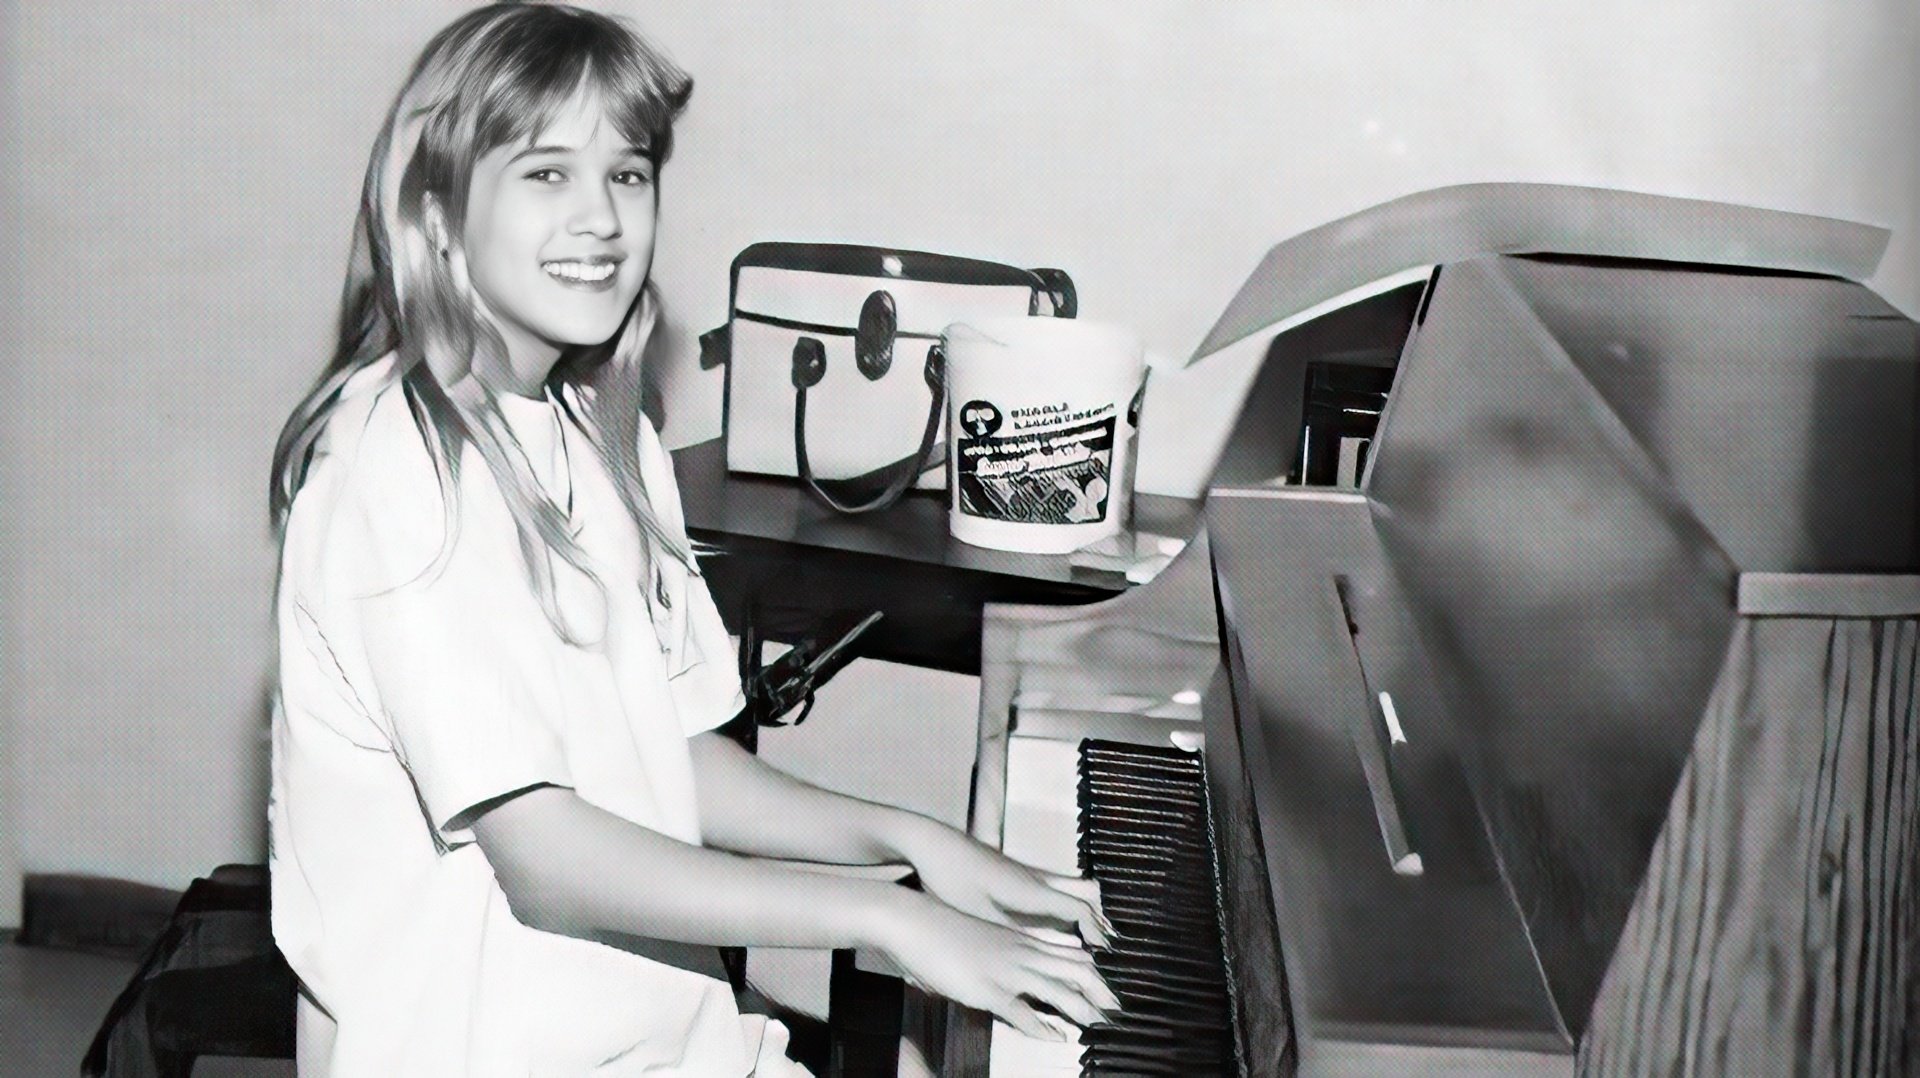 Carrie Underwood in her youth